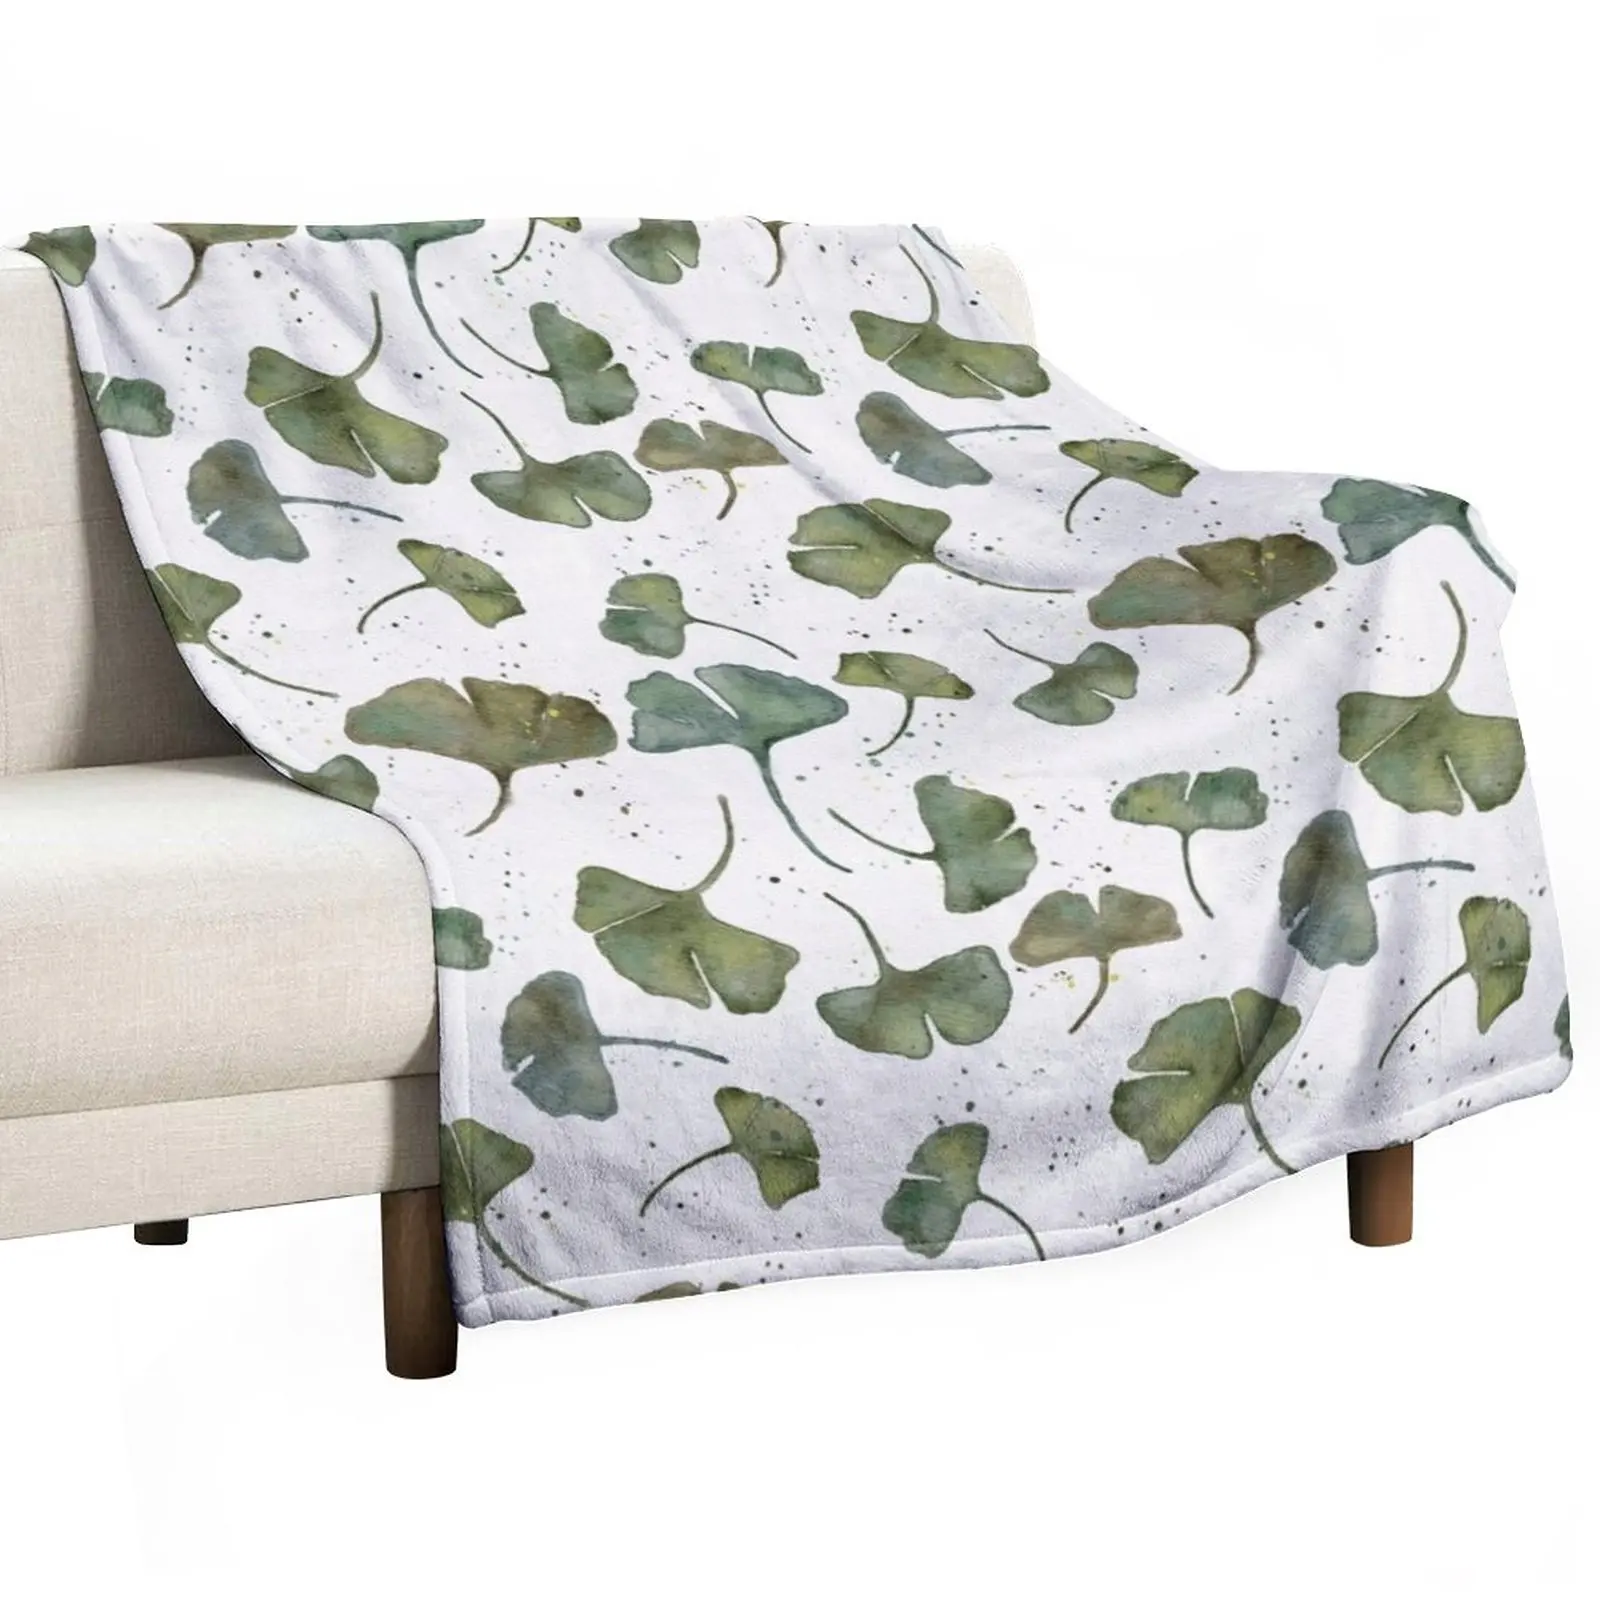 

Ginkgo Leaves in Watercolor Throw Blanket Nap Blanket Blankets For Sofas Personalized Gift